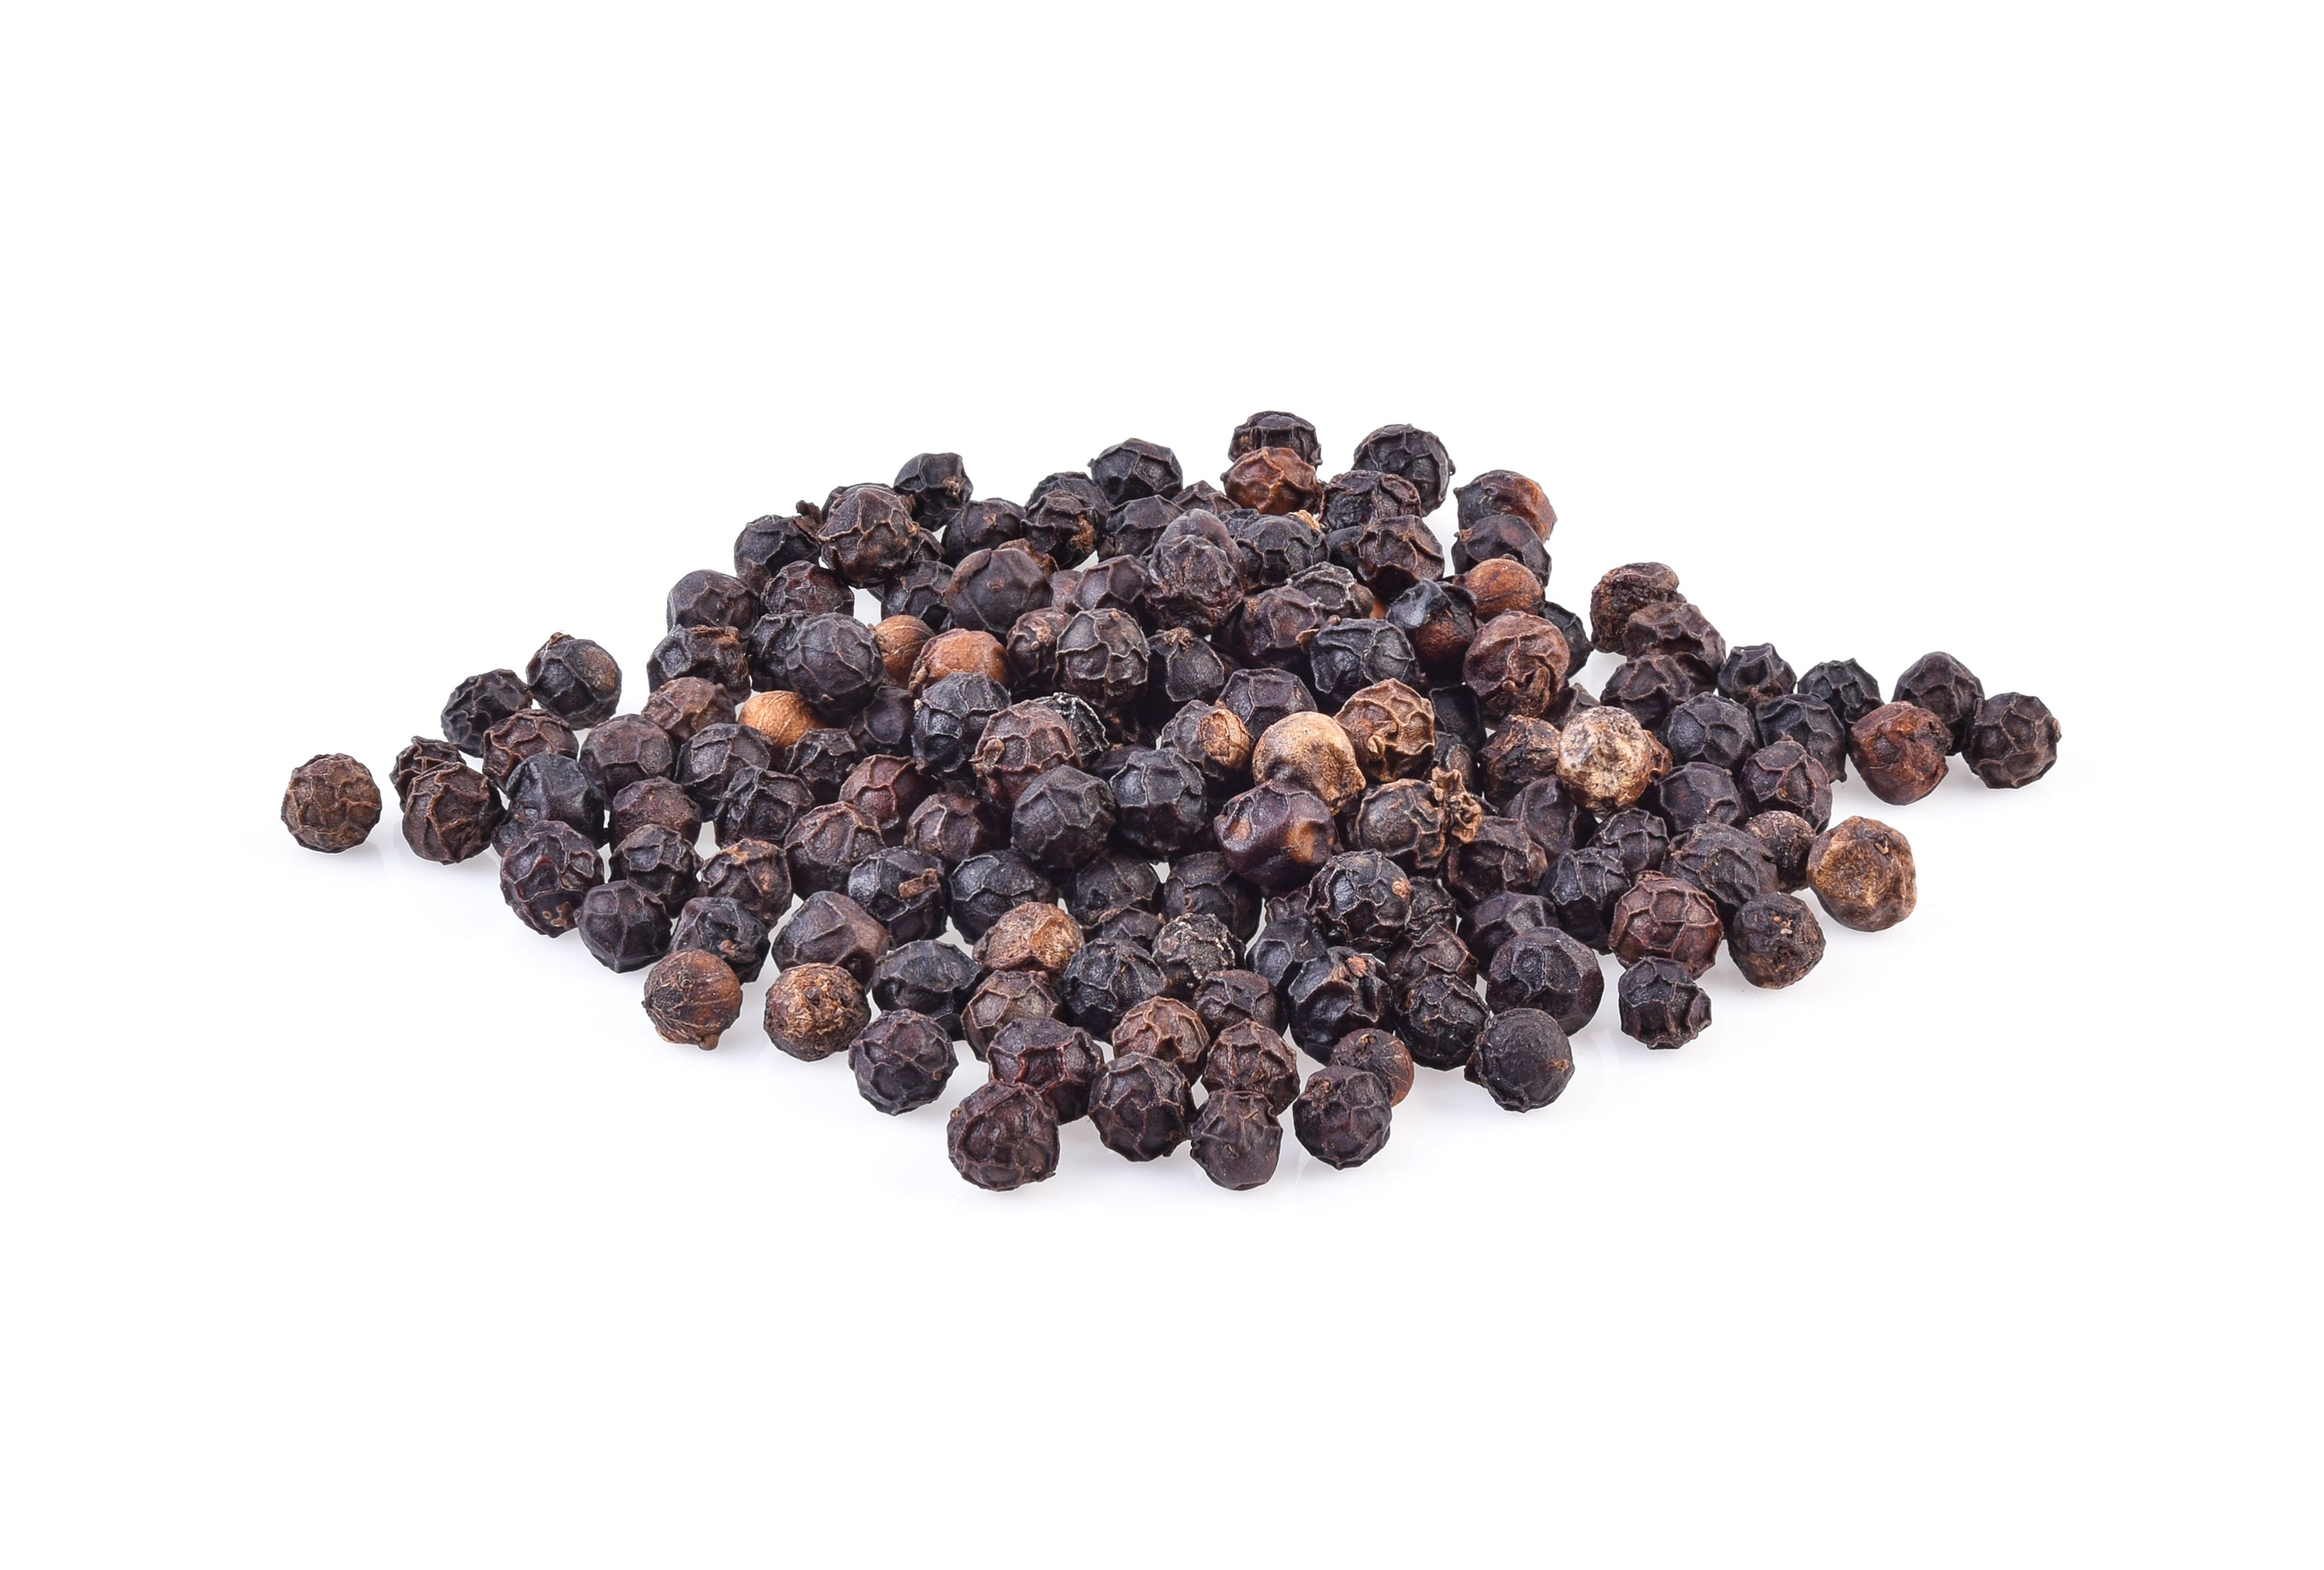 Close-Up Of Black Peppercorn On White Background